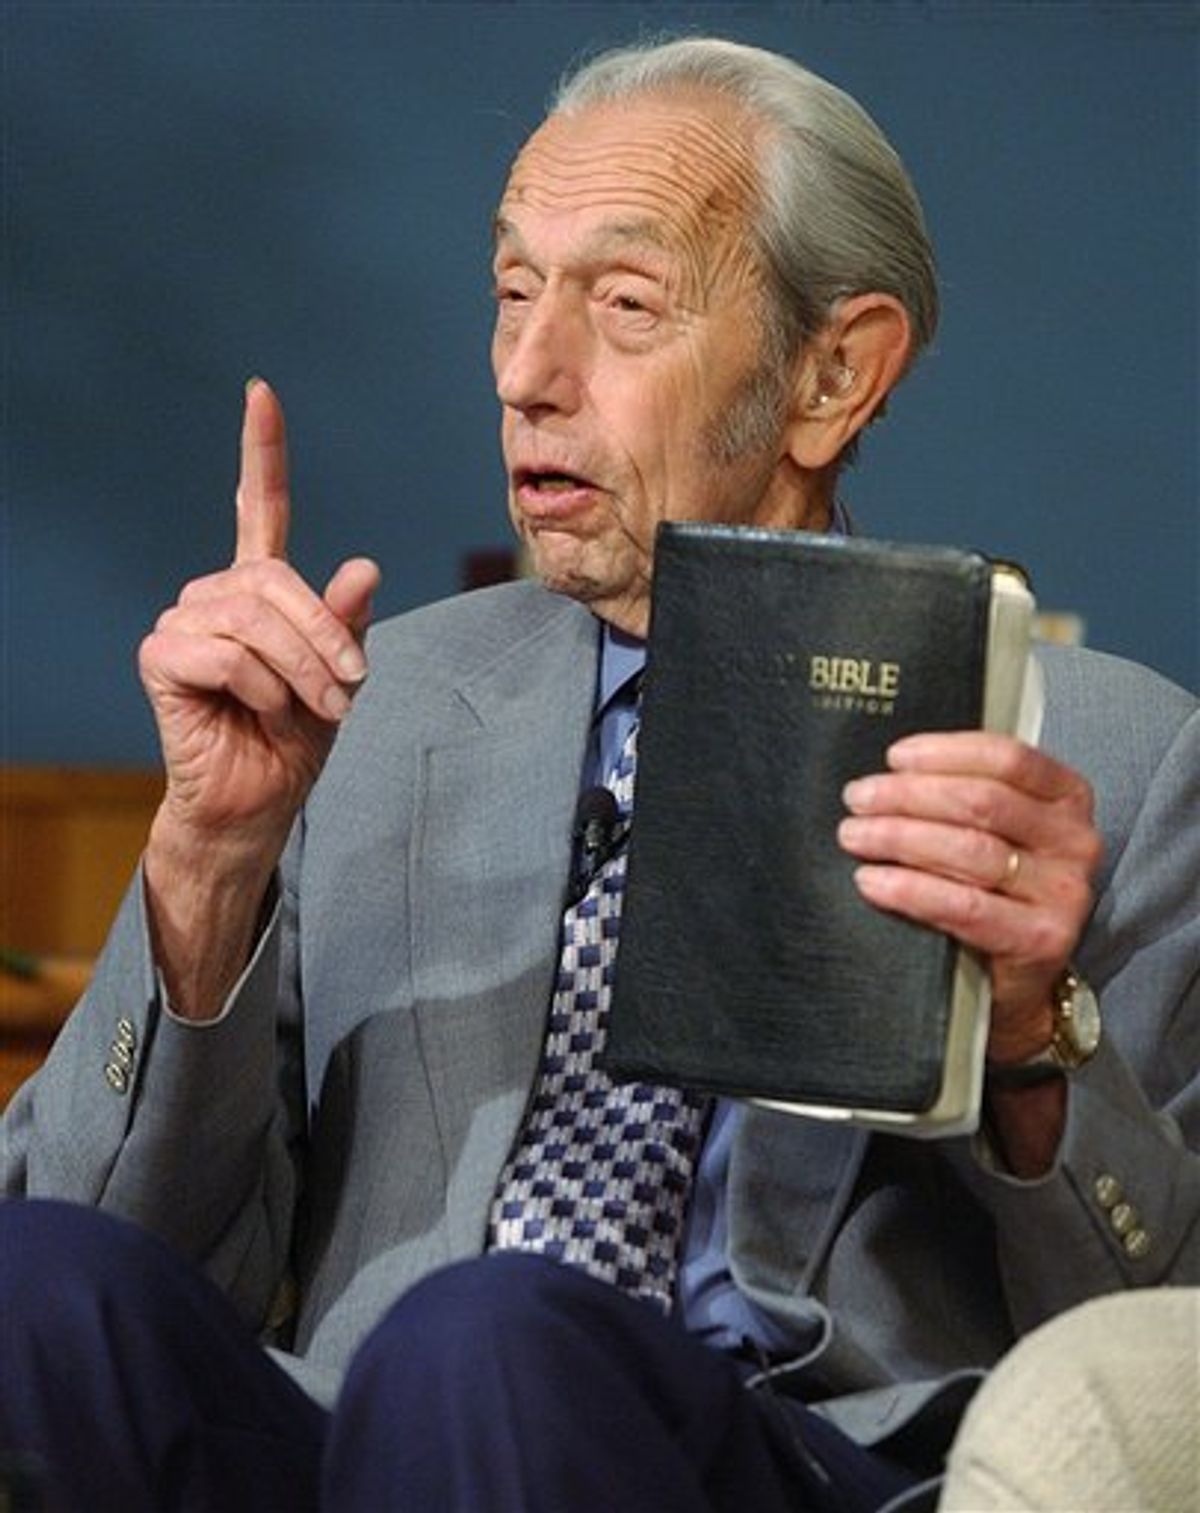 FILE - In this Dec. 12, 2002 file photo, Harold Camping speaks while holding the Bible, in San Leandro, Calif. A loosely organized Christian movement has spread the word around the globe that Jesus Christ will return to earth on Saturday, May 21, 2011, to gather the faithful into heaven. While the Christian mainstream isn't buying it, many other skeptics are believing it. The prediction originates with Camping, the 89-year-old retired civil engineer, who founded Family Radio Worldwide, an independent ministry that has broadcasted his prediction around the world. (AP Photo, File) (AP)